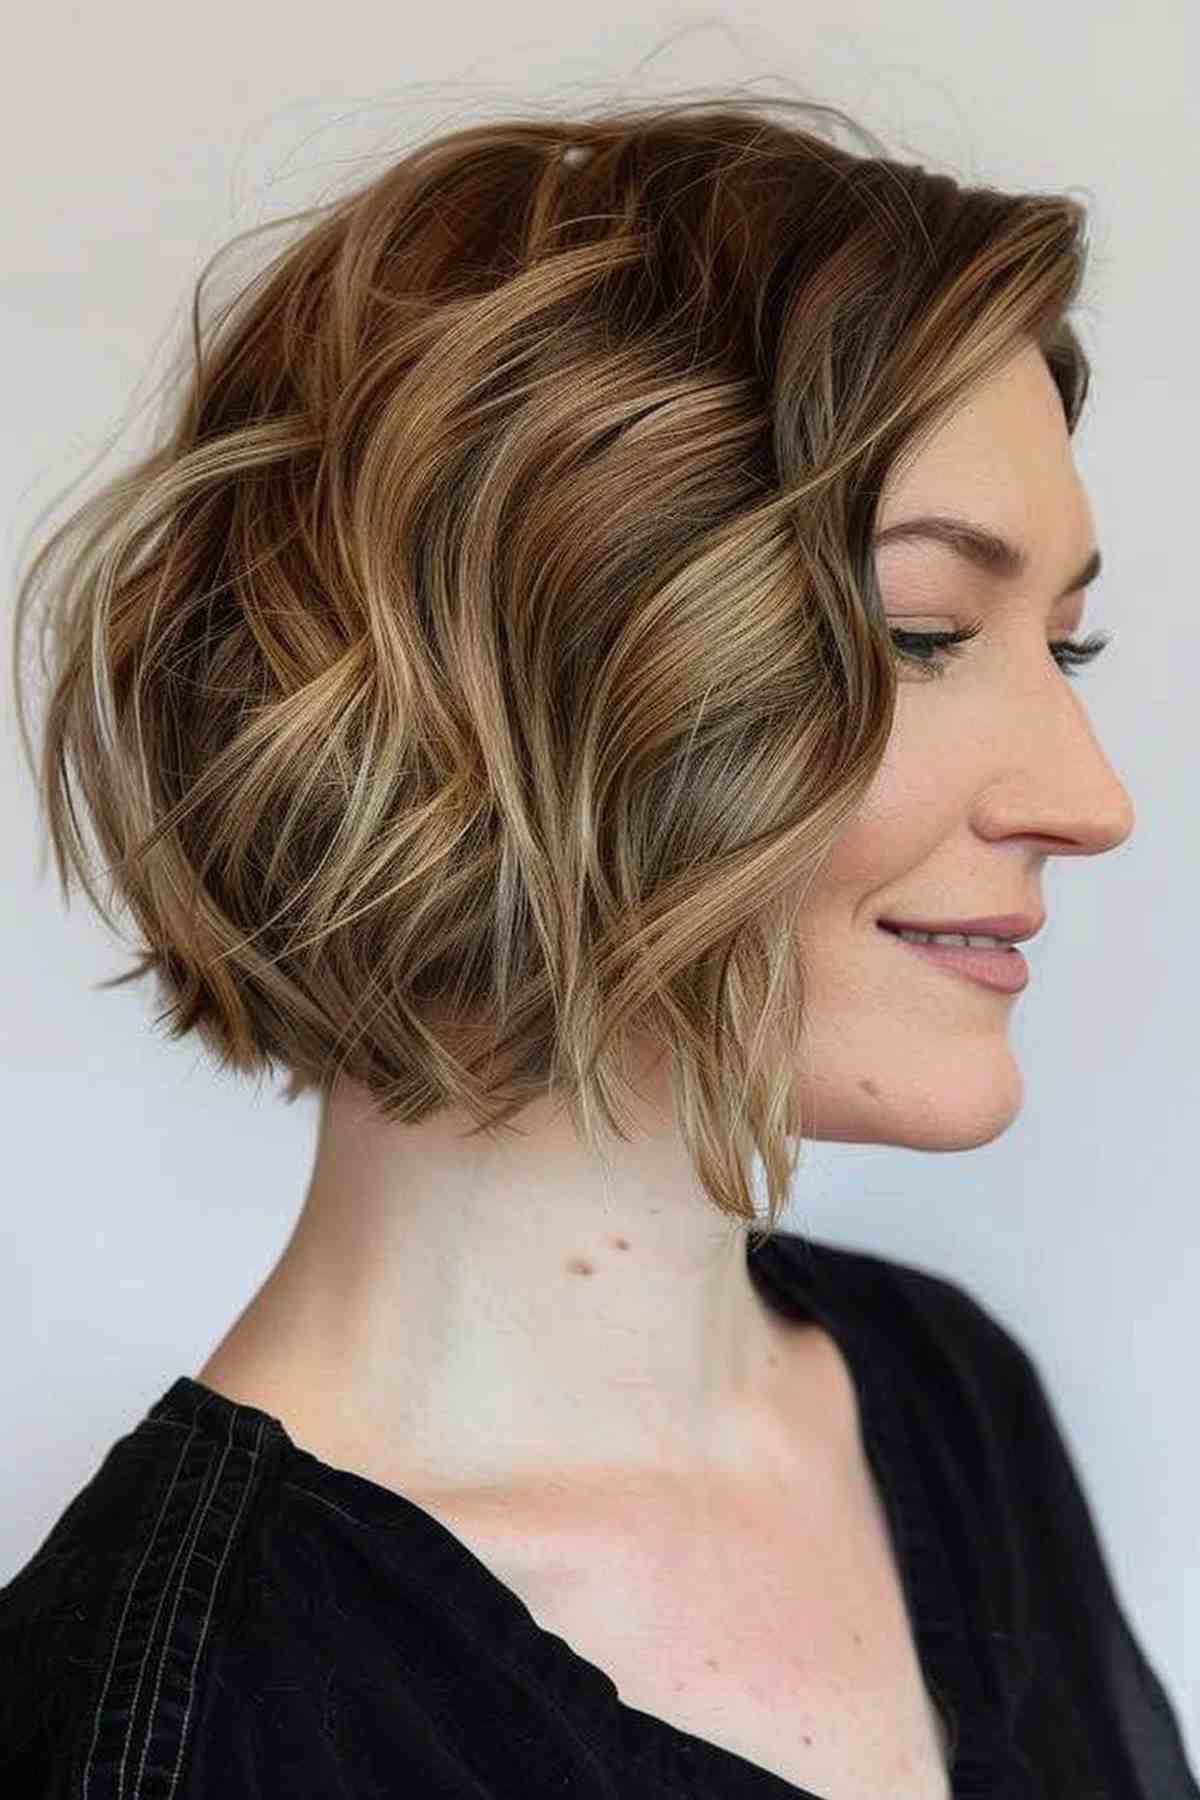 A wavy A-line bob cut with tousled waves and face-framing highlights.